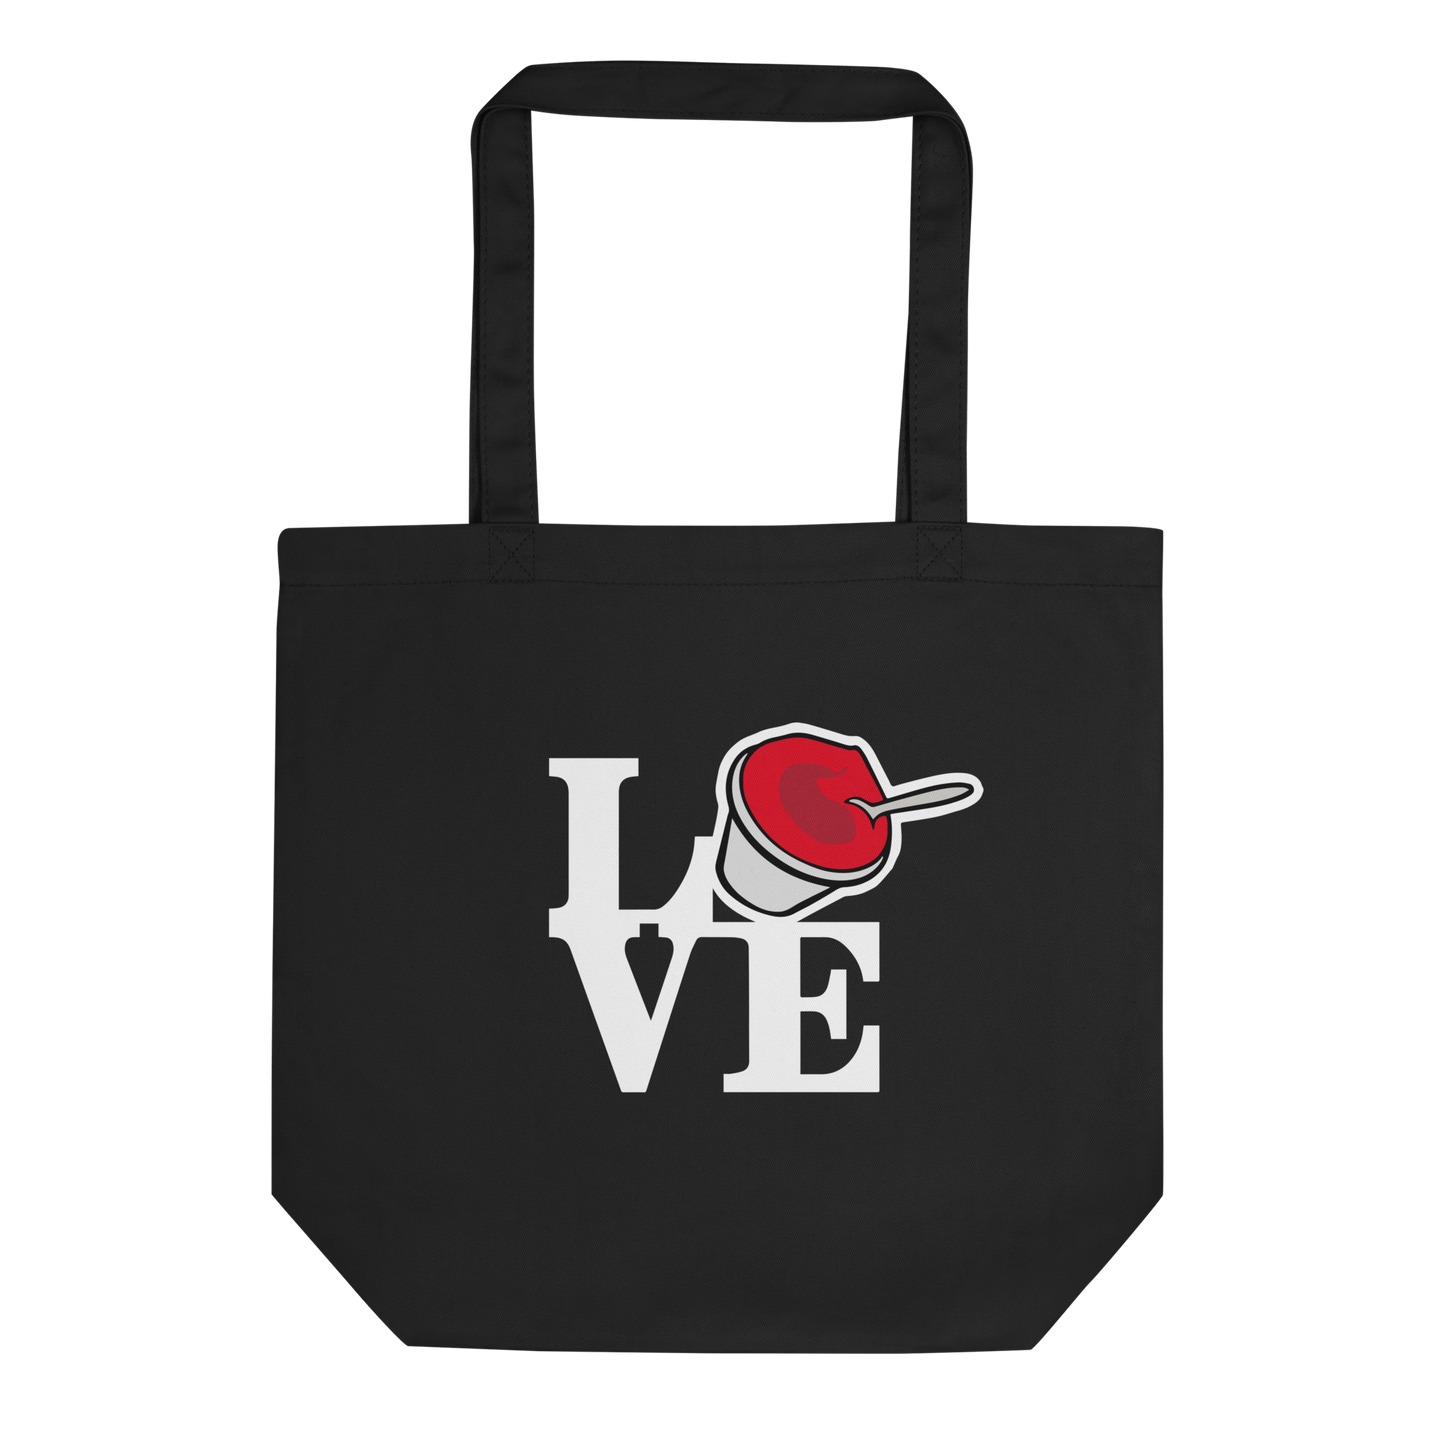 LOVE PHILLY WOODER ICE Eco-Tote Bag - Black